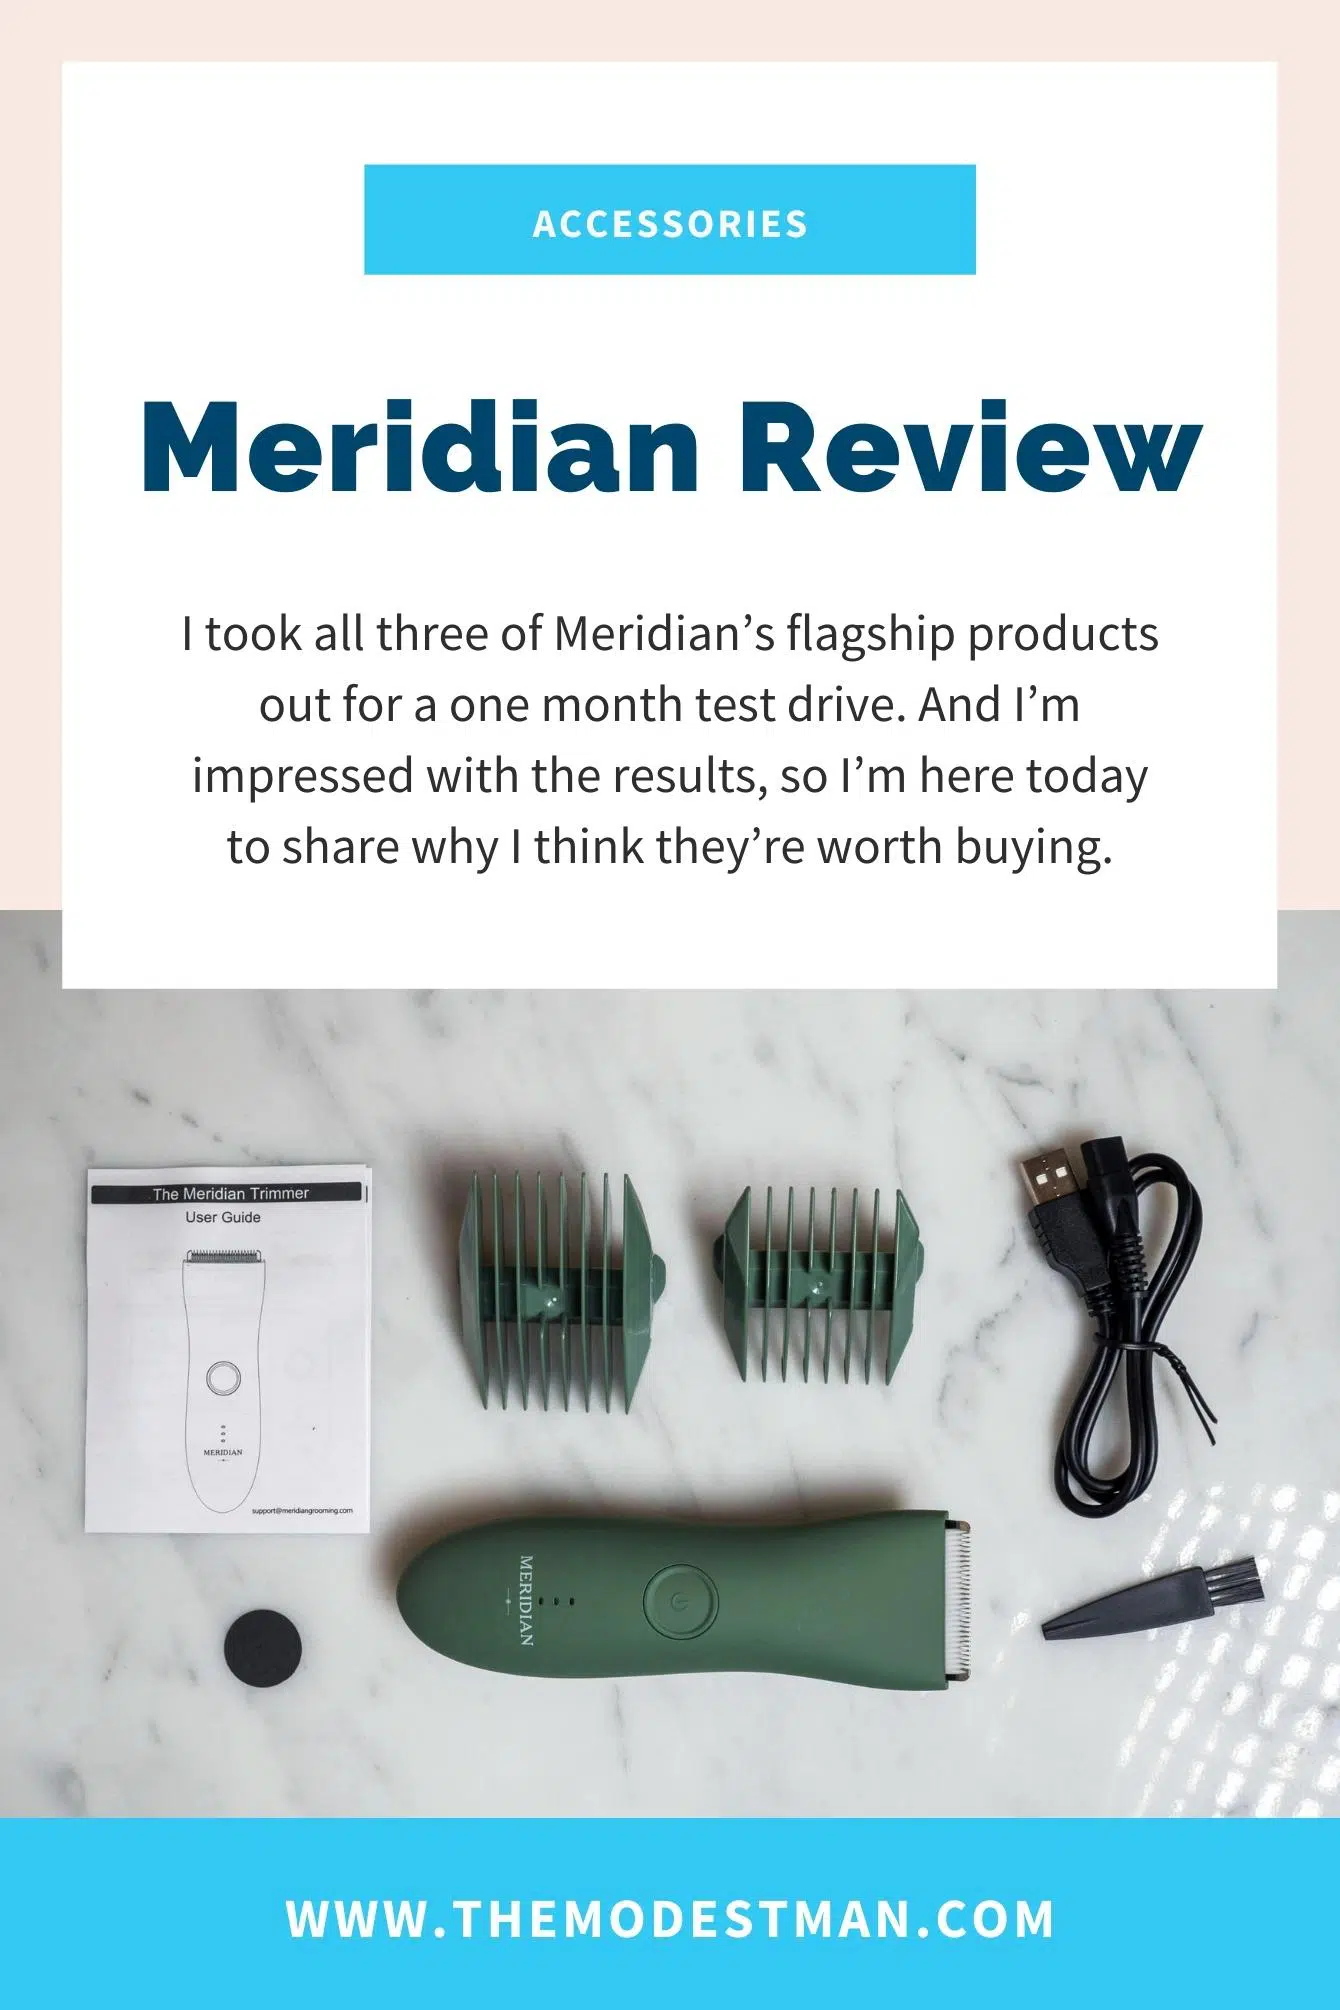 Meridian Brand Review